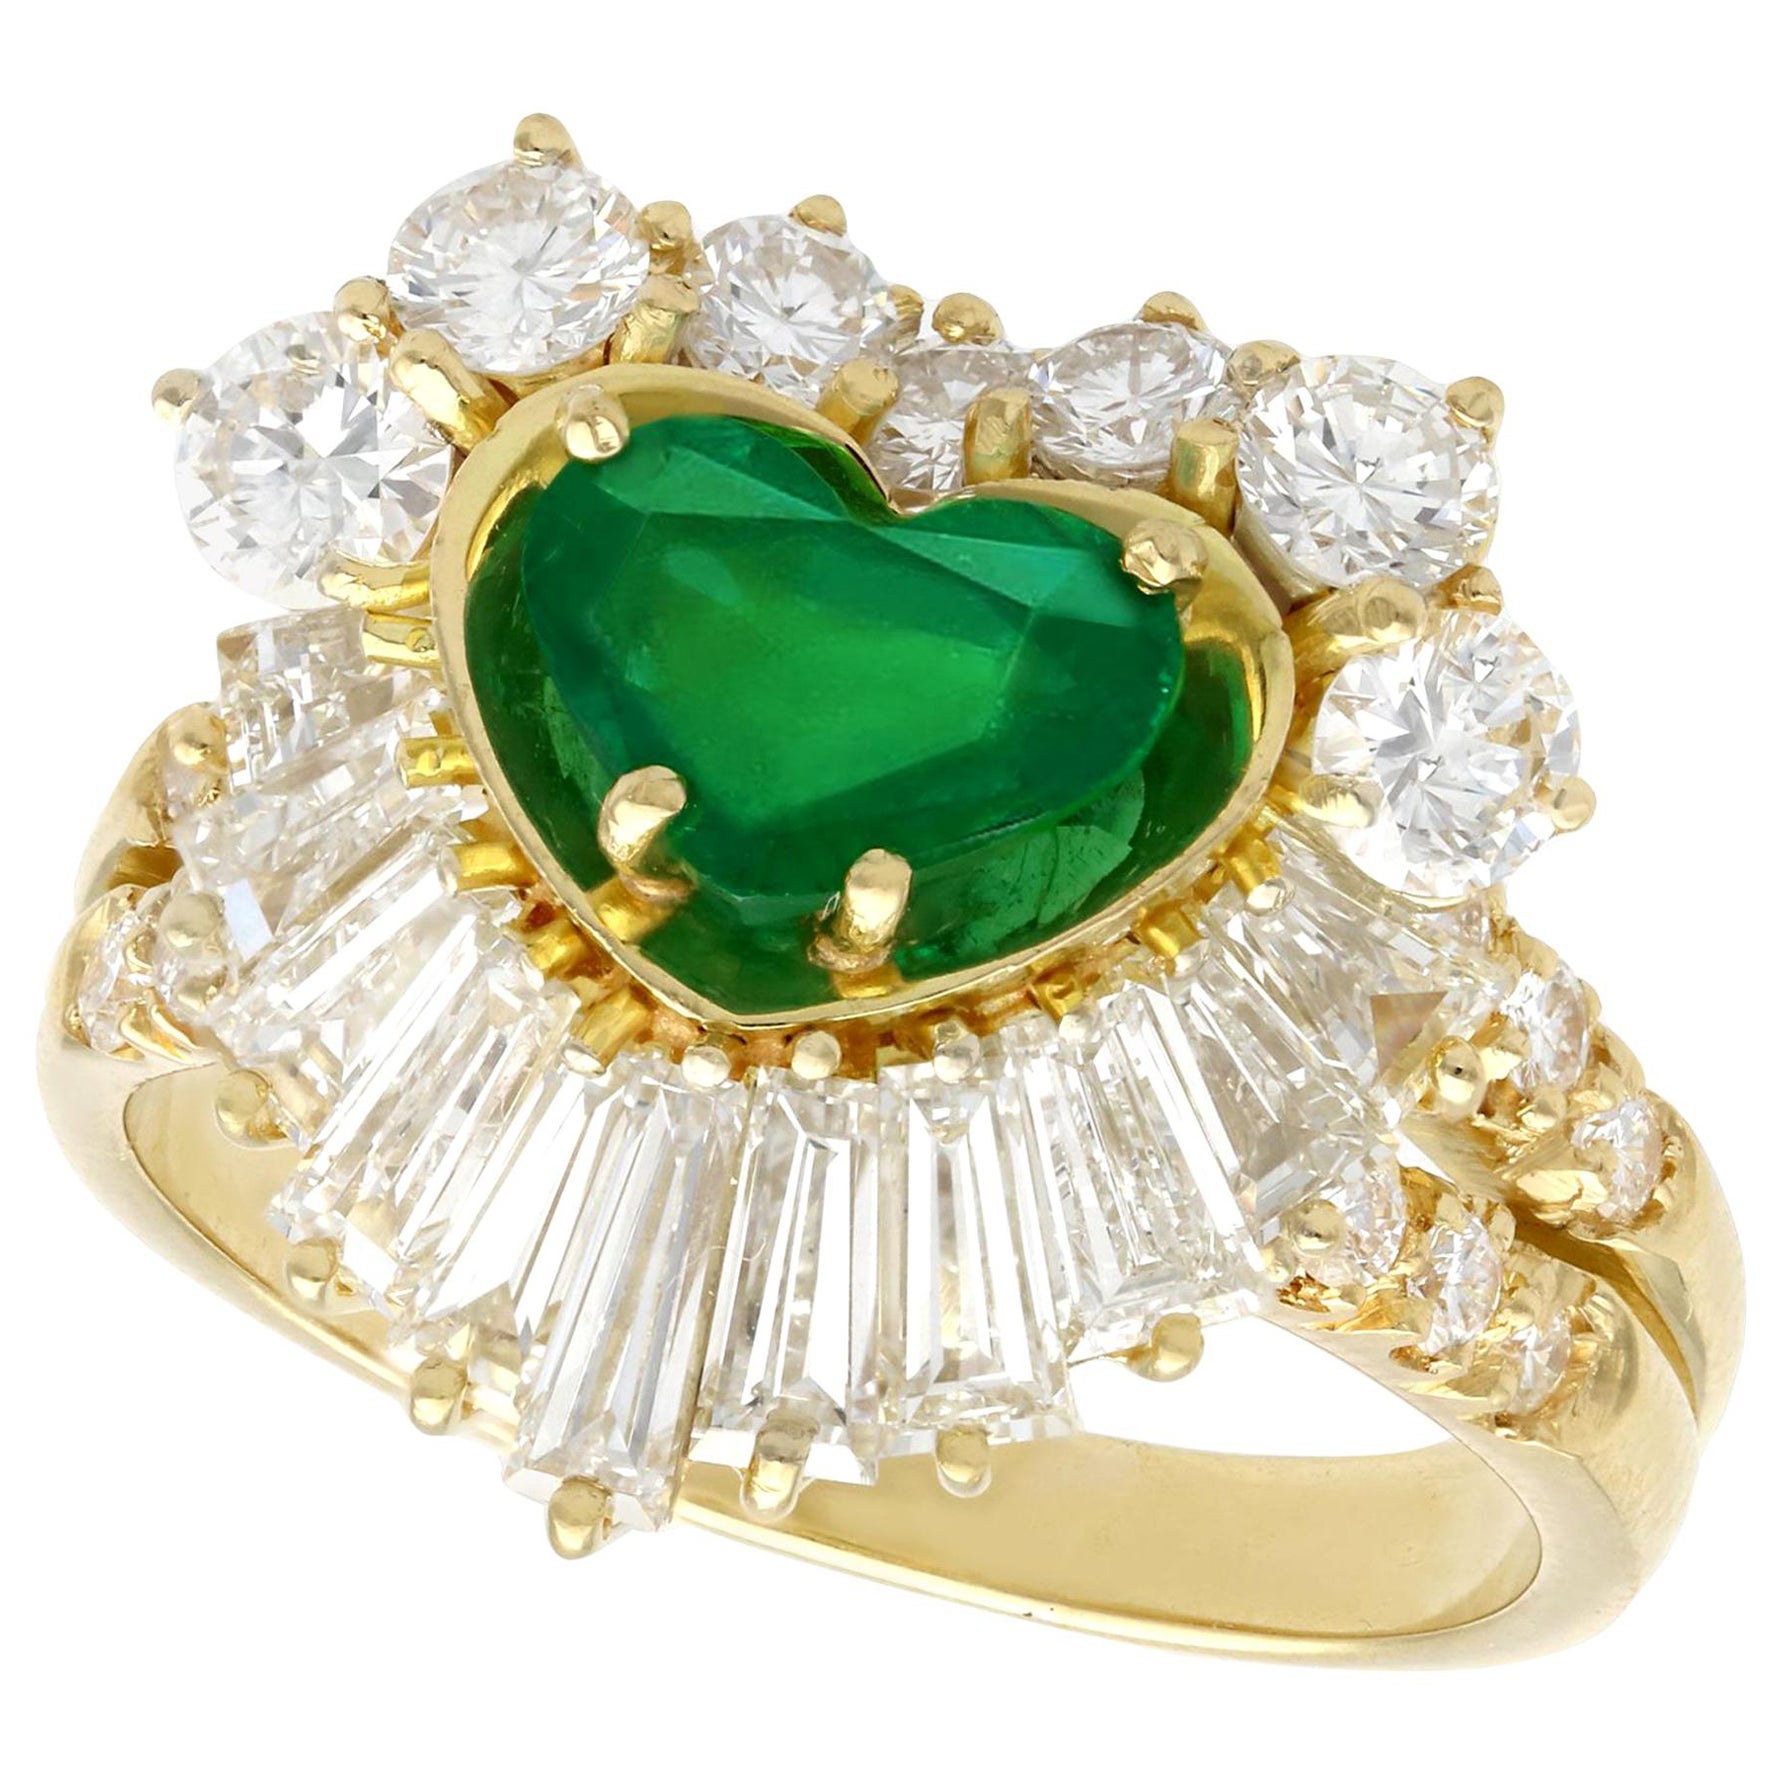 A stunning vintage 1.63 carat Zambian emerald and 2.31 carat diamond, 18 karat yellow gold cocktail ring; part of our diverse vintage gemstone jewelry collections

This stunning, fine and impressive emerald ring has been crafted in 18k yellow